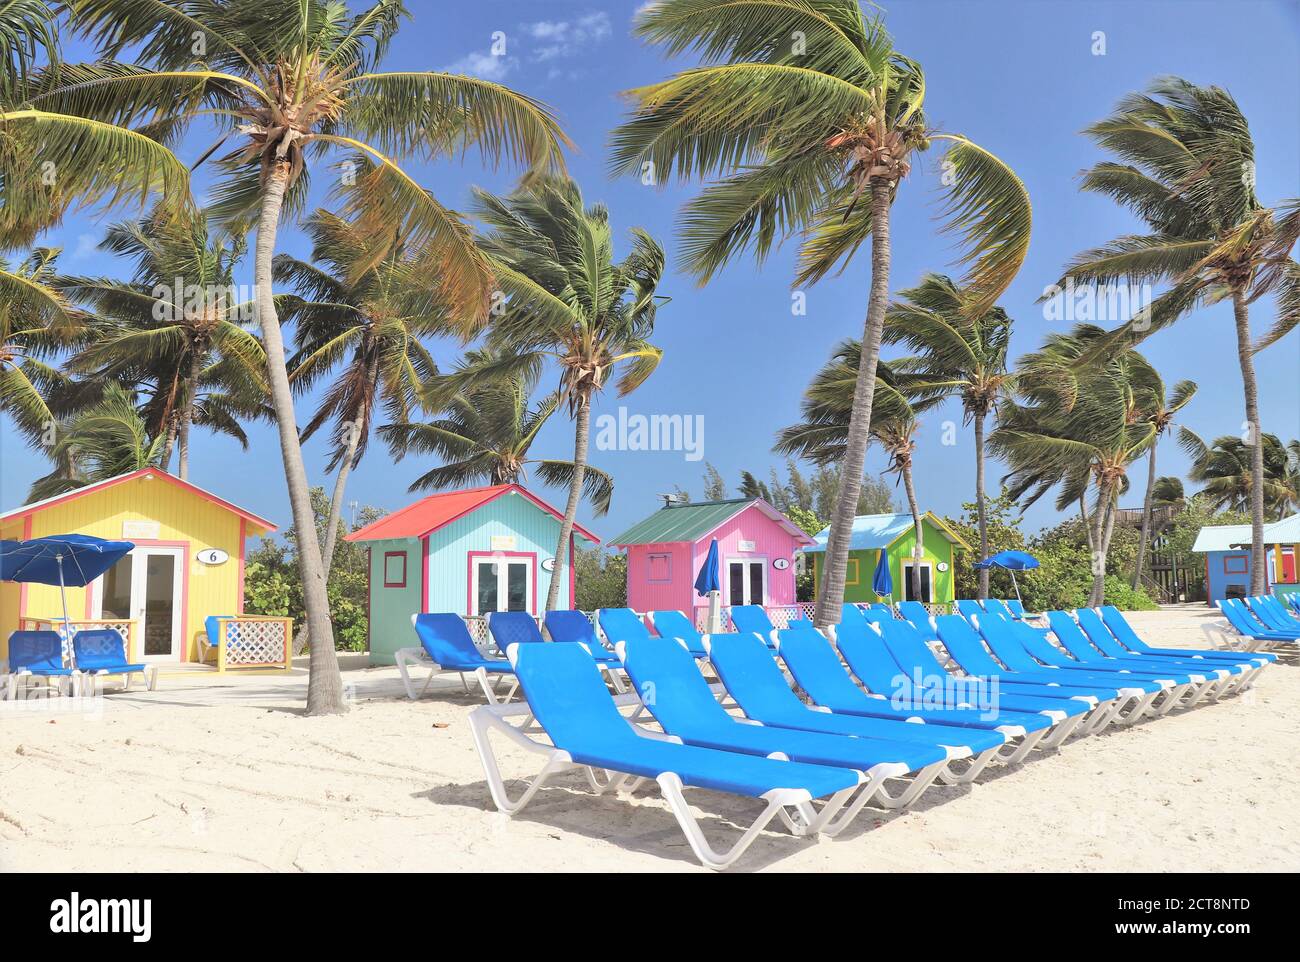 Colorful cabanas and lounge chairs on the beach in Princess Cays Stock ...